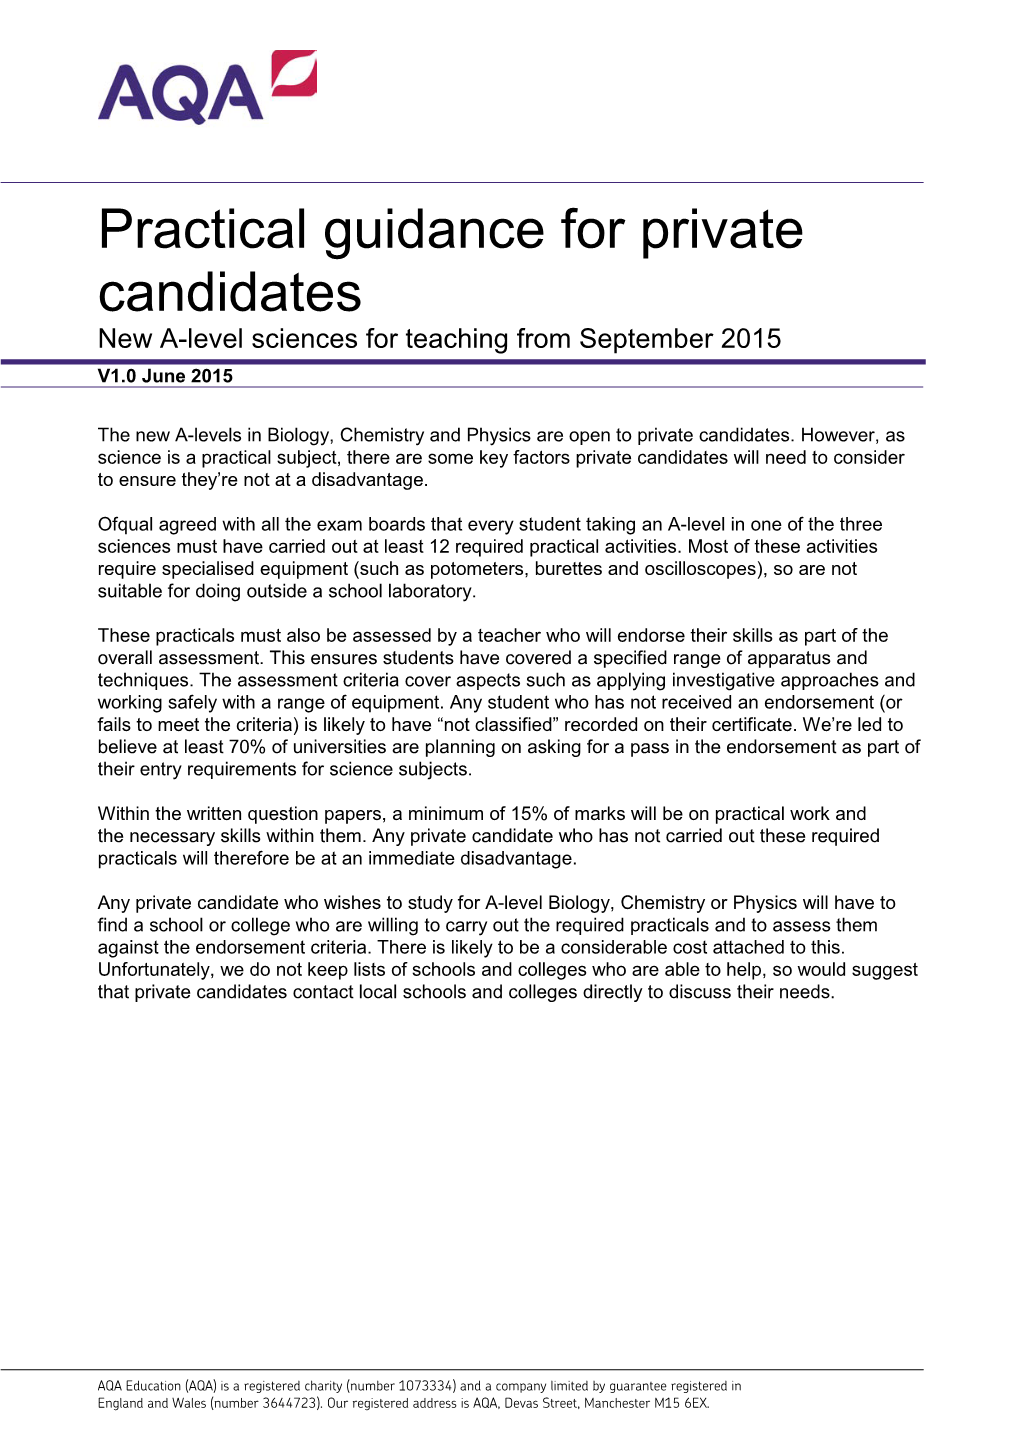 Getting Started: Private Candidates Practical Guidance